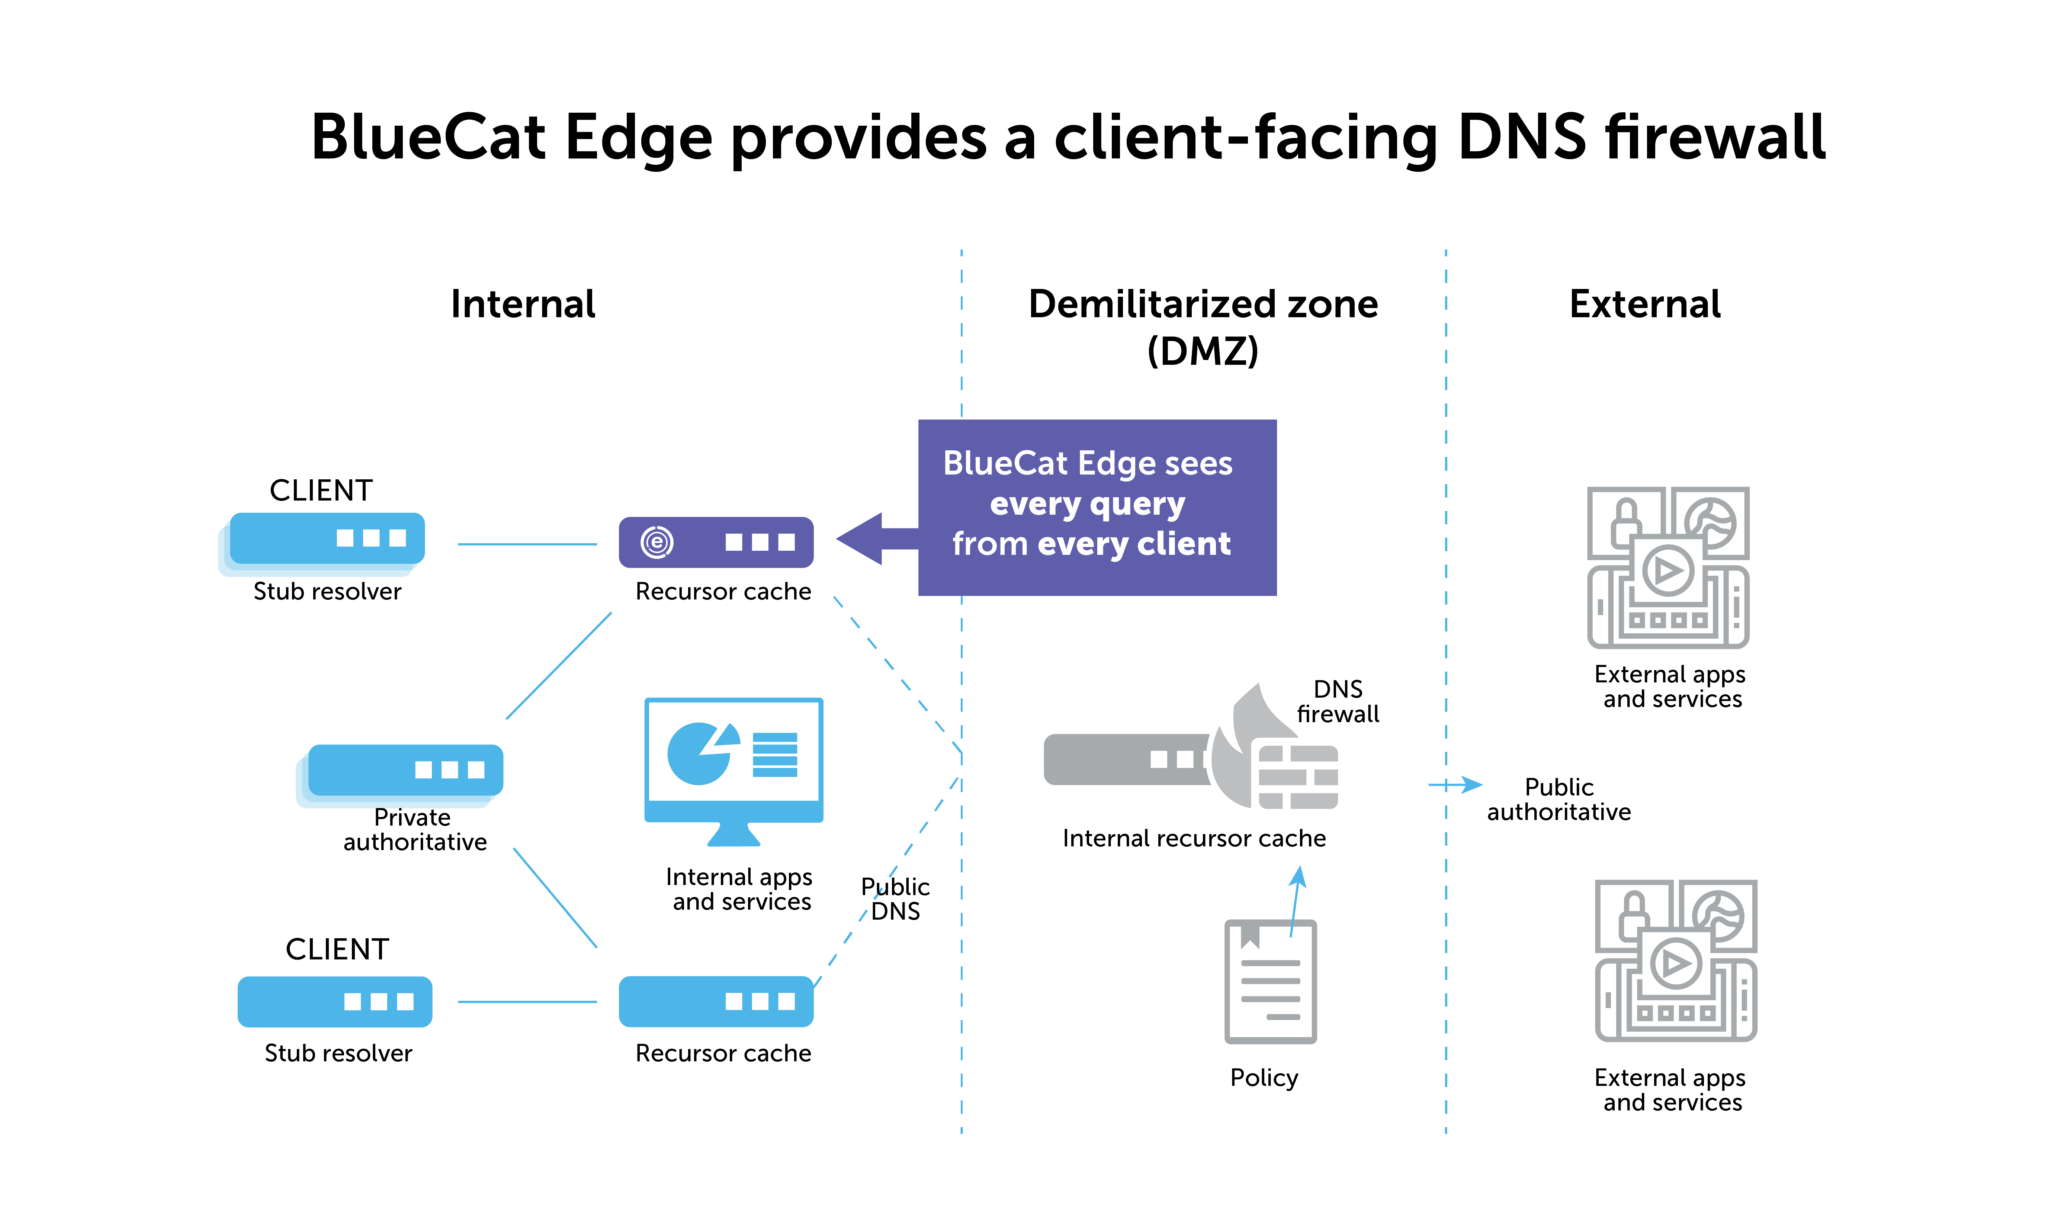 BlueCat Edge provides a client-facing DNS firewall, seeing every query from every client